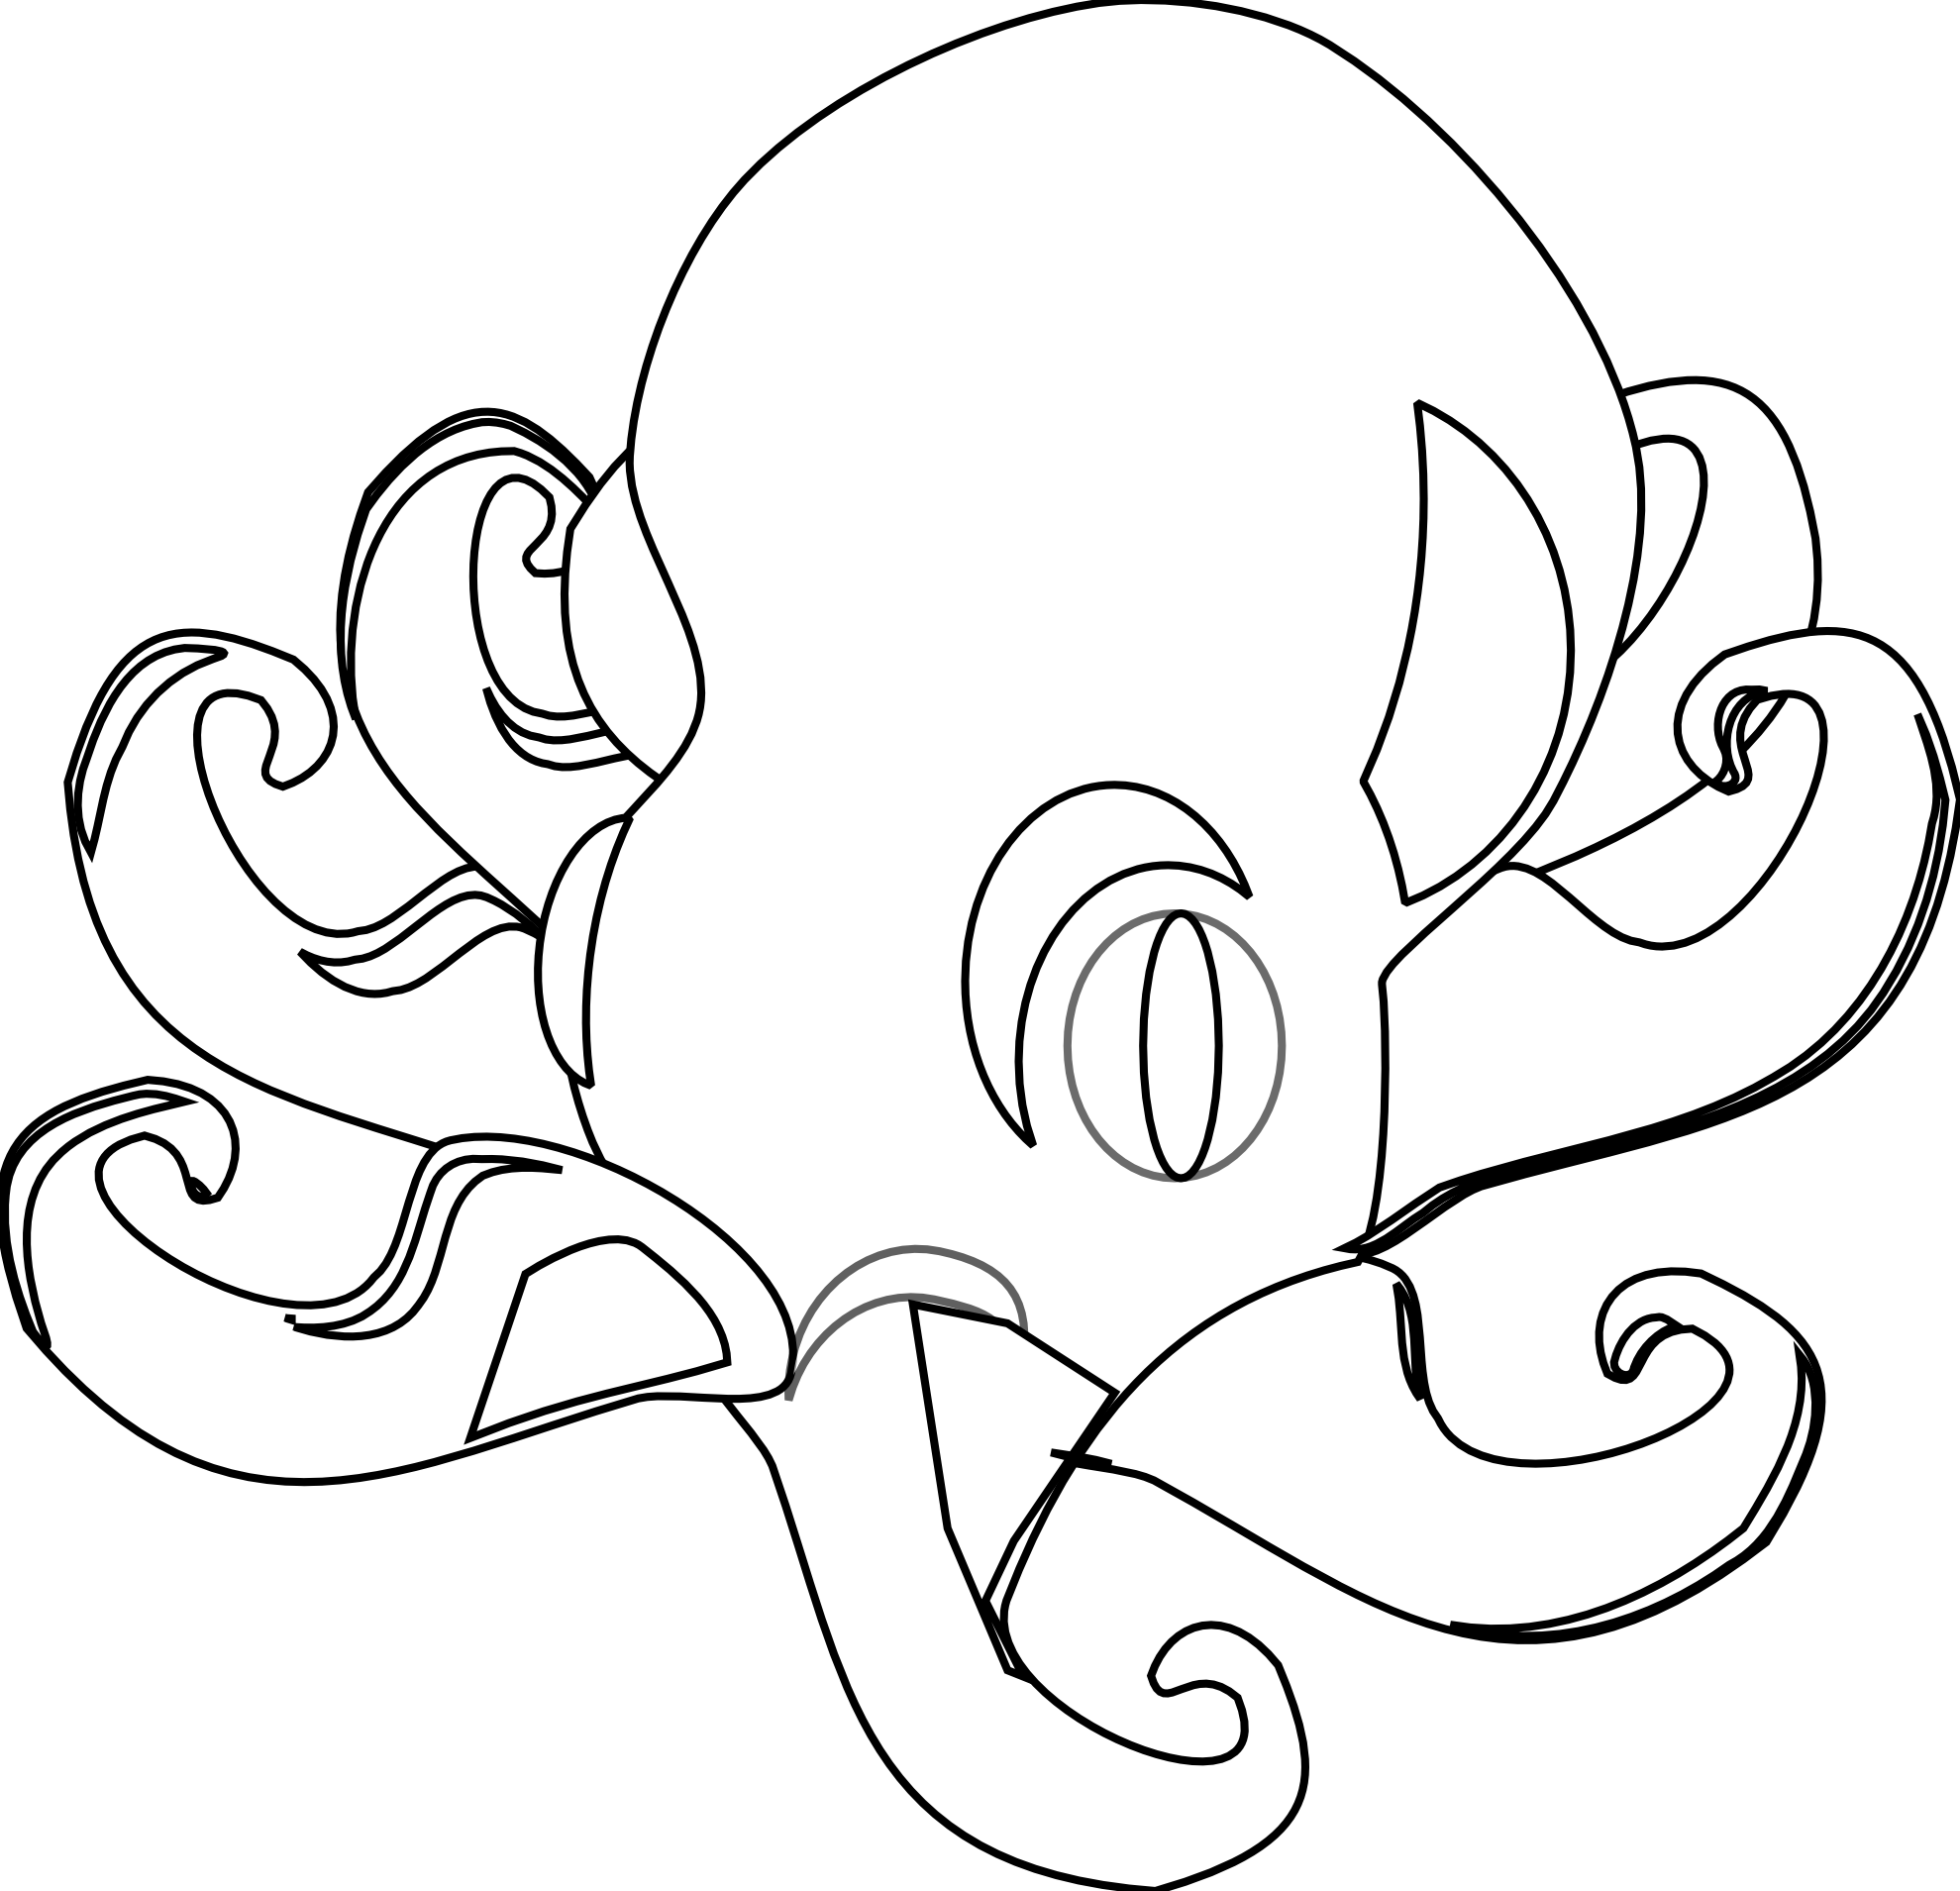 Octopus  black and white octopus clipart black and white free images 7